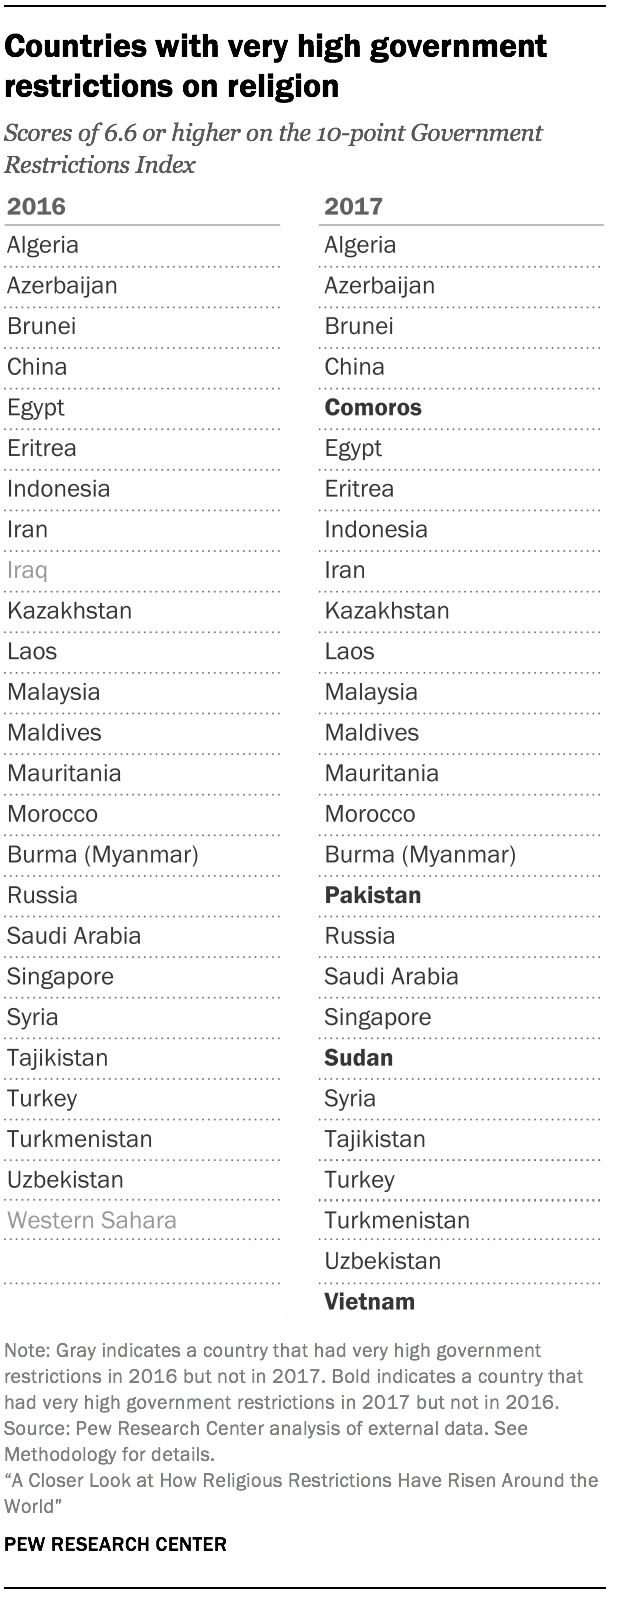 Countries with very high government restrictions on religion